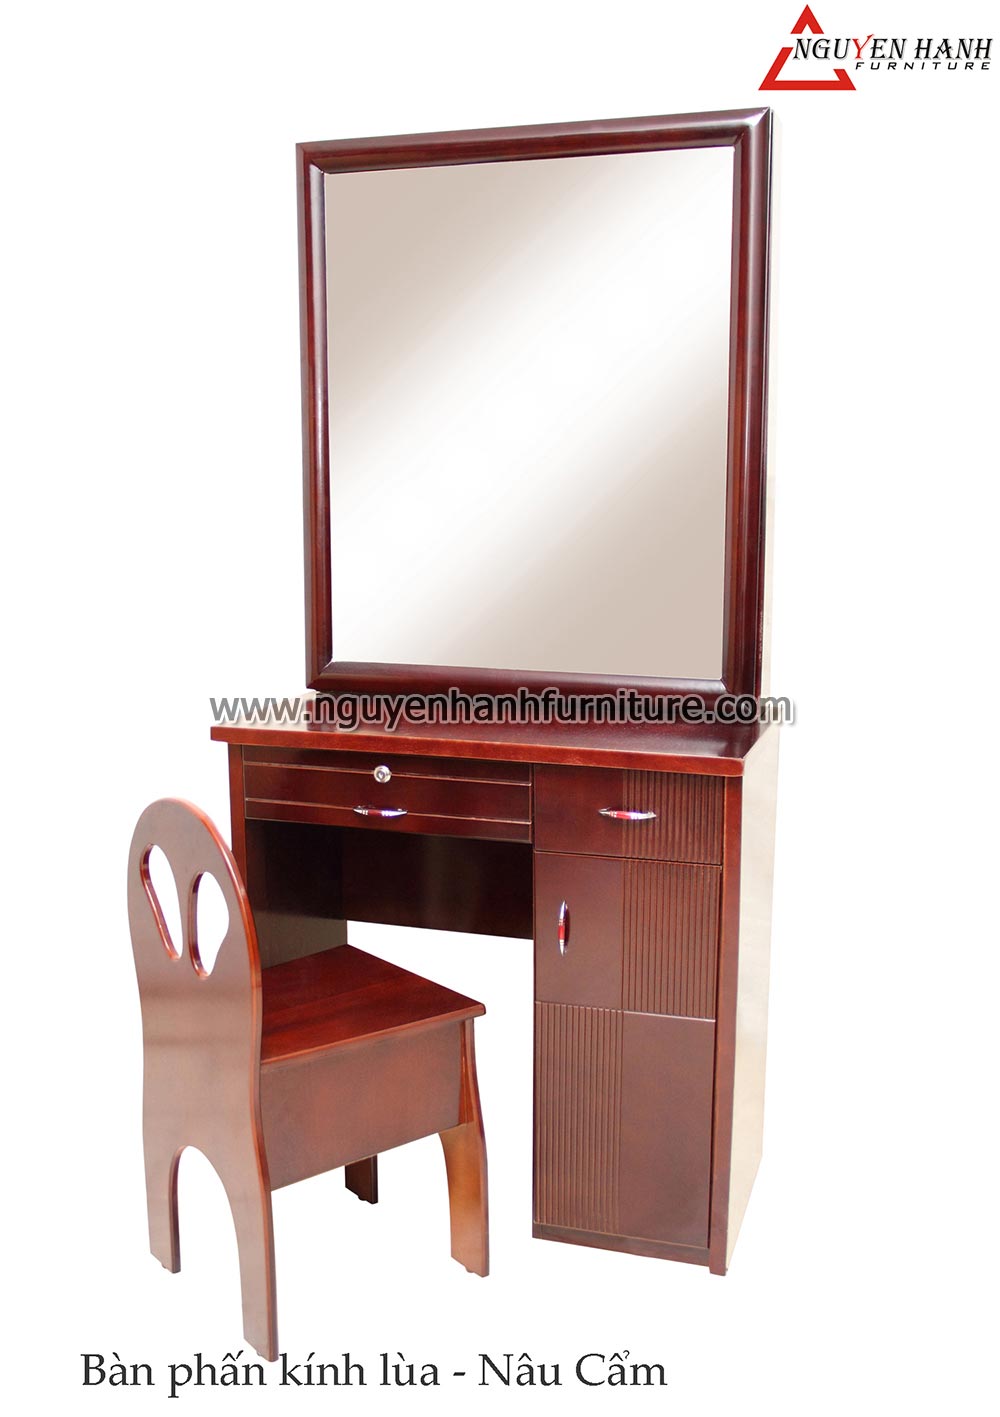 Name product: Brown Makeup Desk of Rosewood with closet mirror 